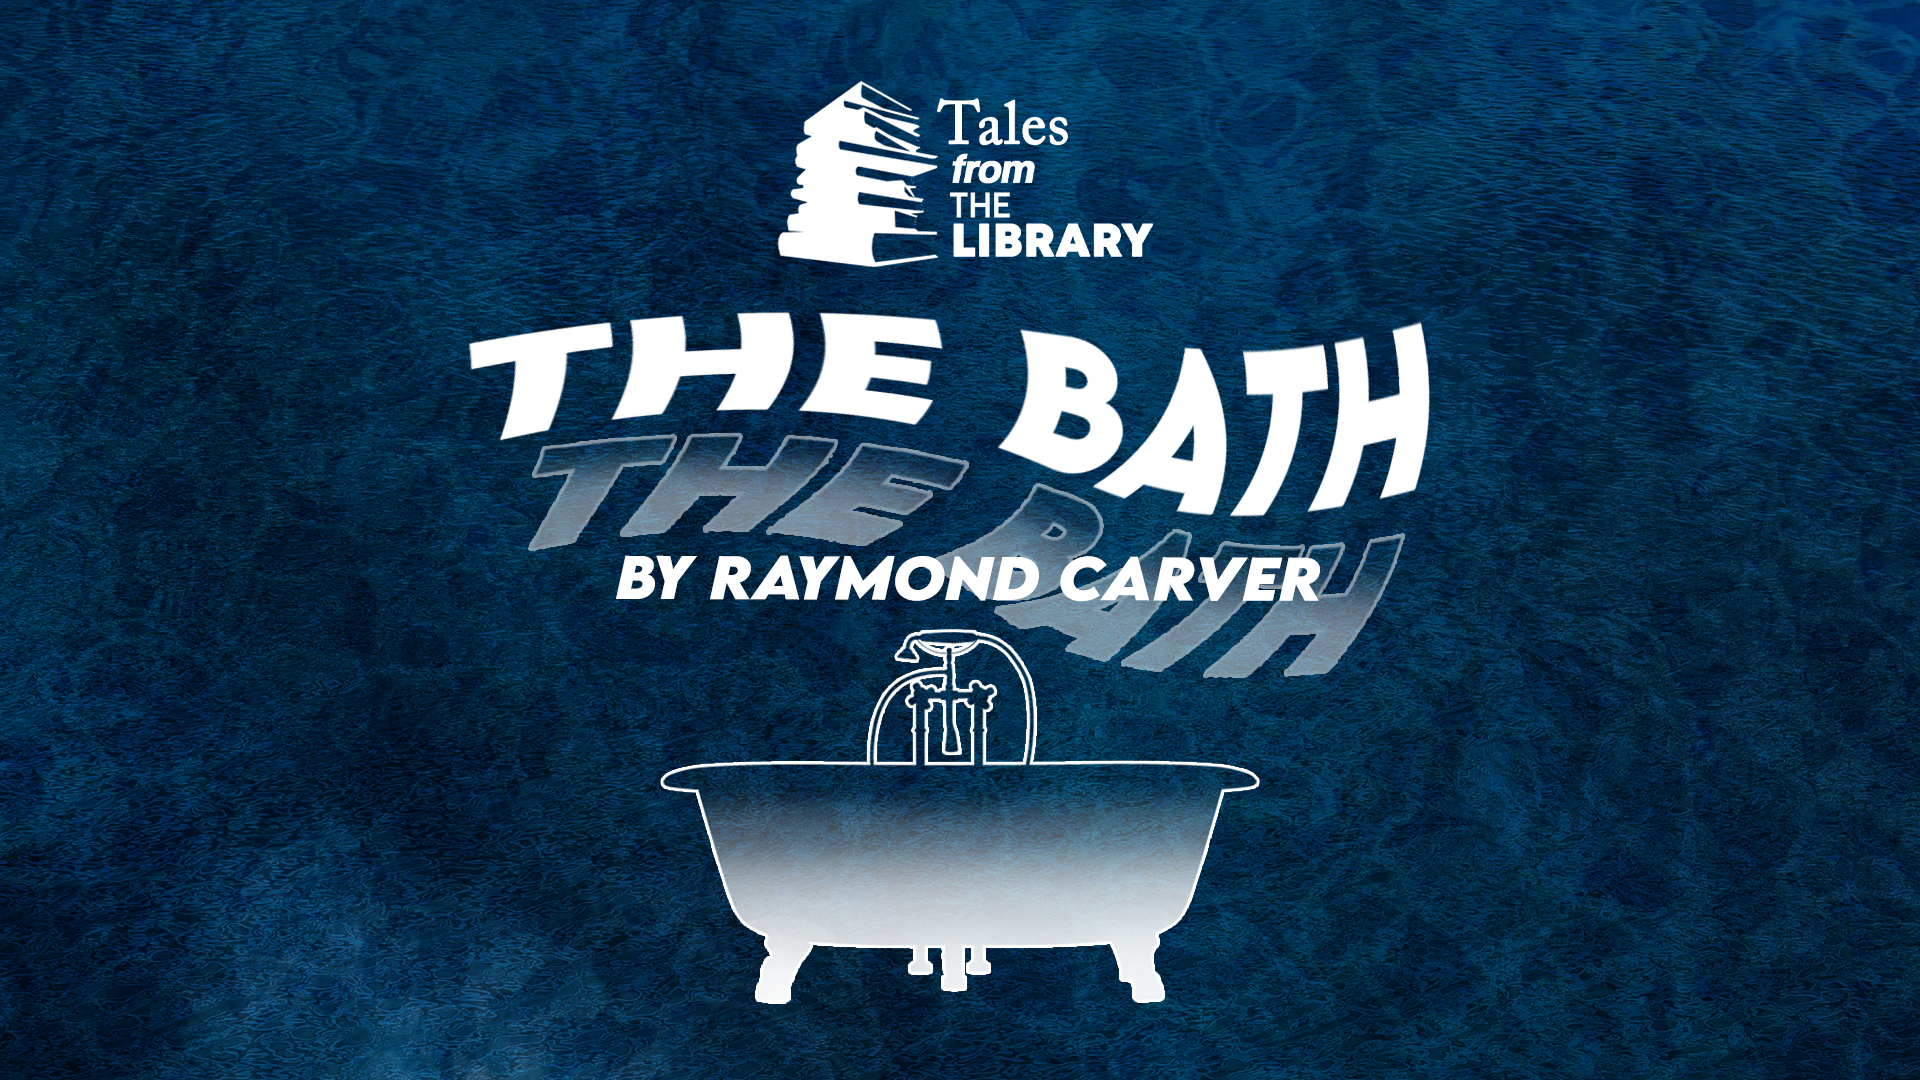 Tales From The Library - The Bath